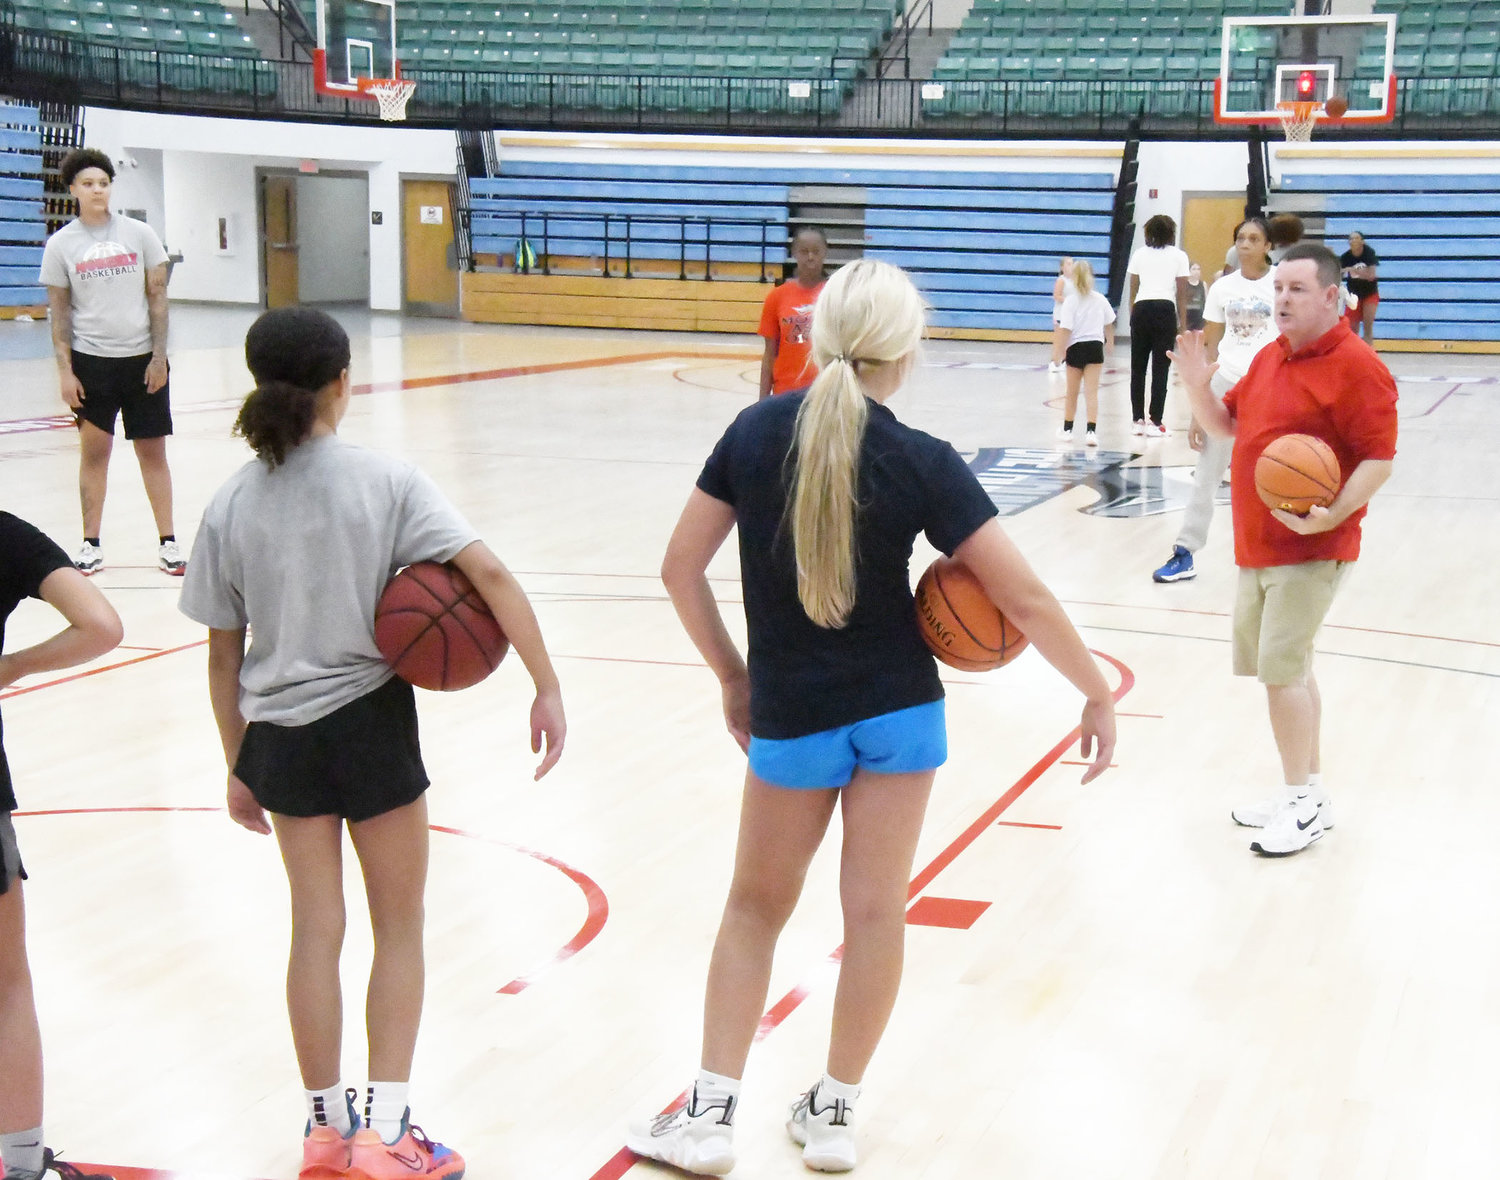 New Moberly Area Community College assistant women's basketball coach Chris Harris instructs campers during the morning session.